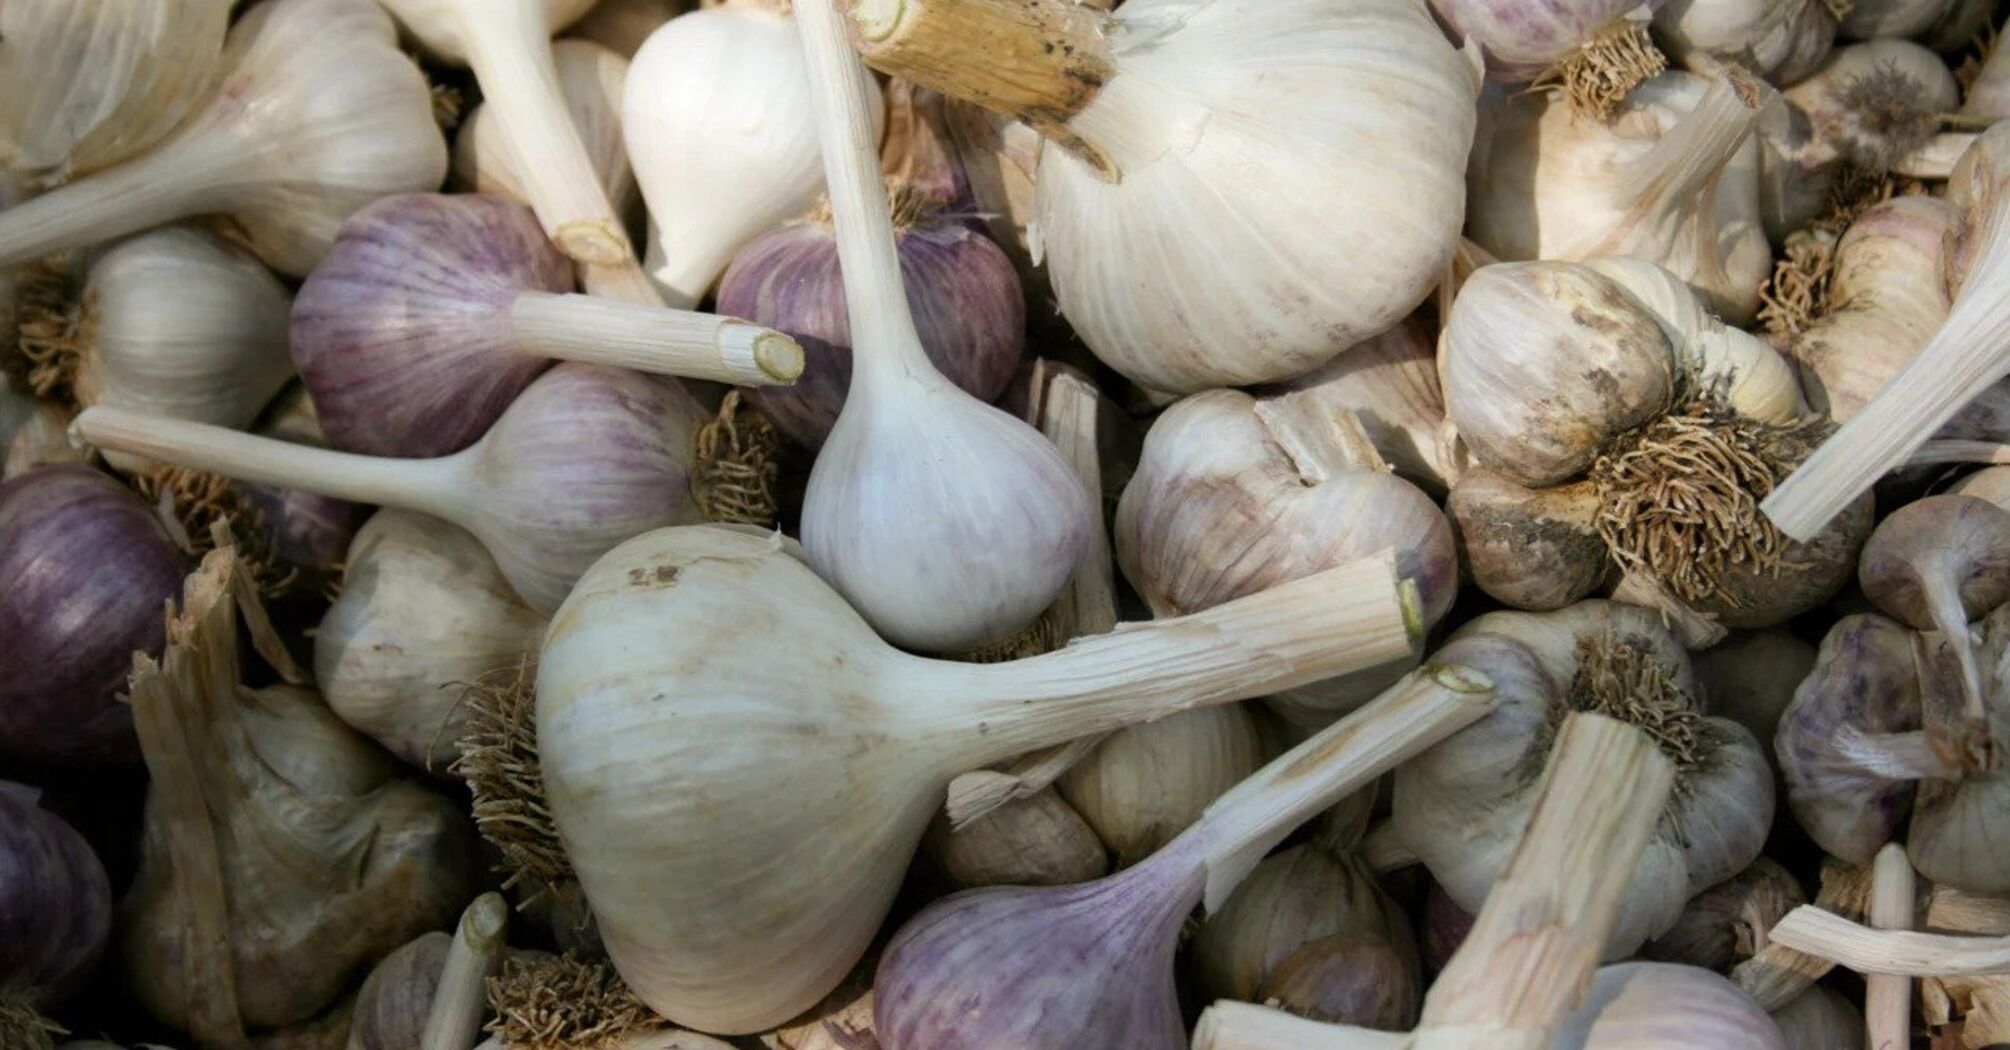 This technique will help increase the size of garlic bulbs